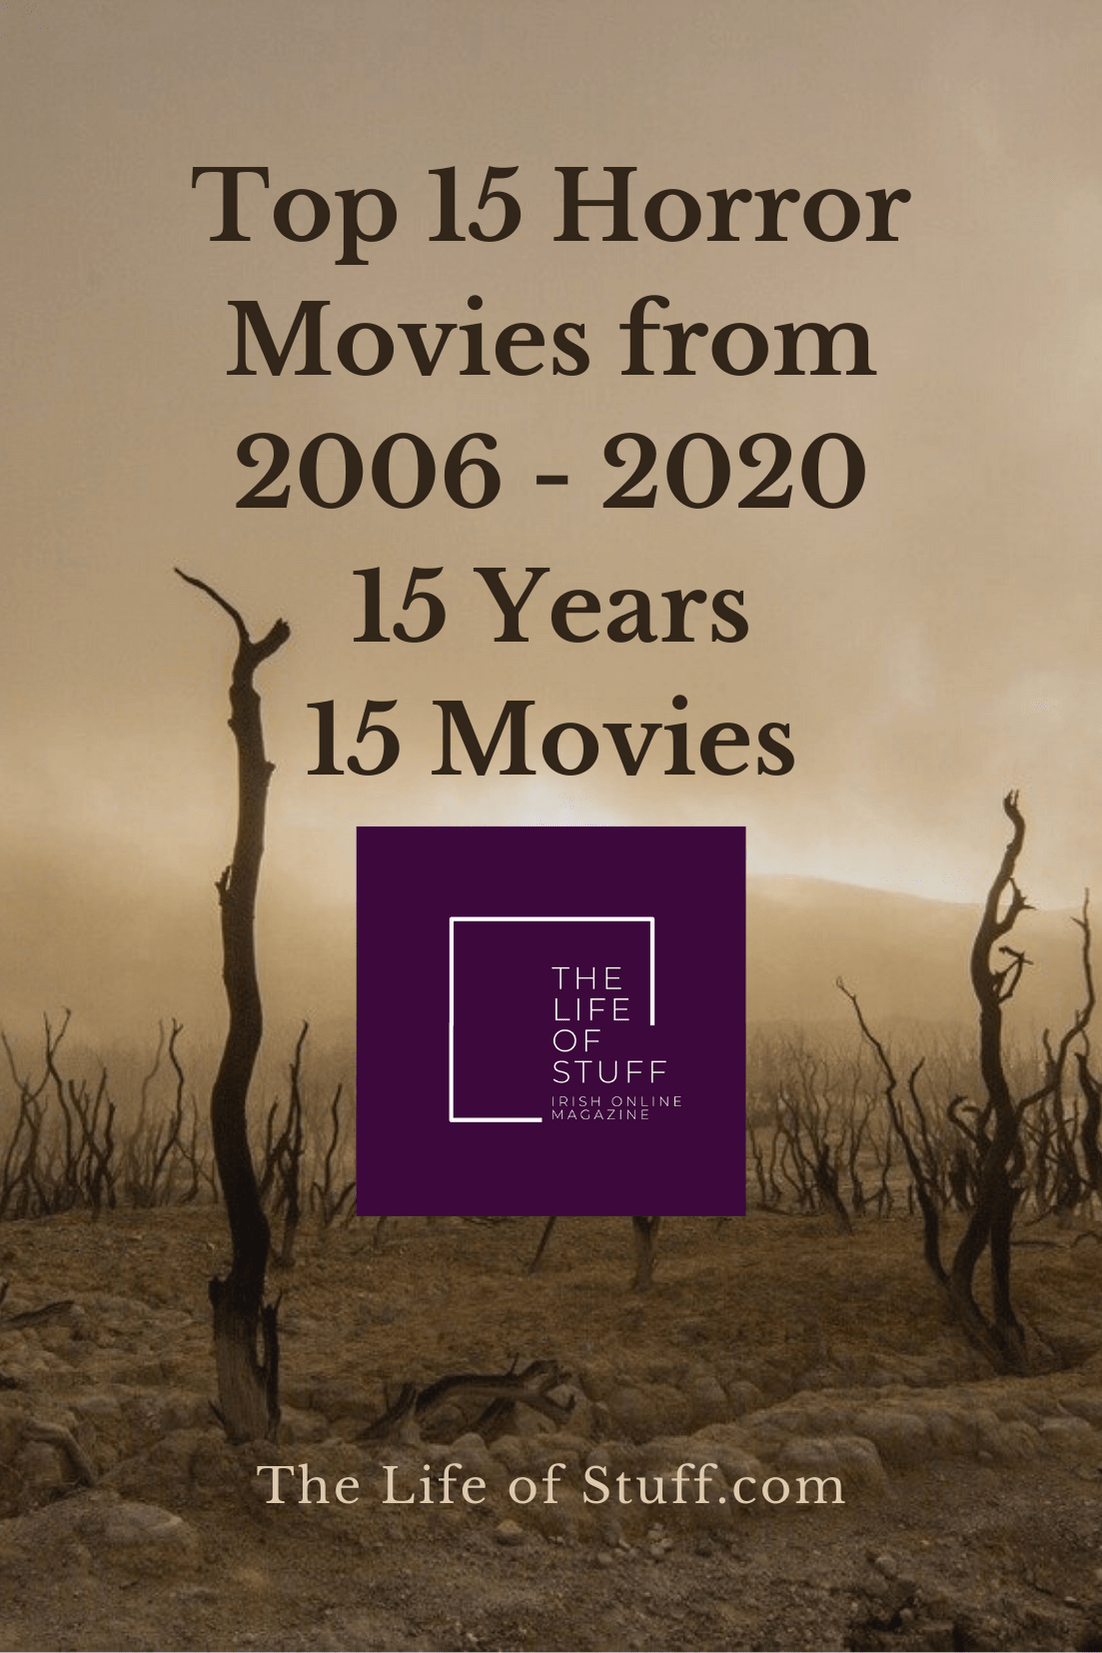 Top 15 Horror Movies from 2006 - 2020. 15 Years 15 Horror Movies on The Life of Stuff